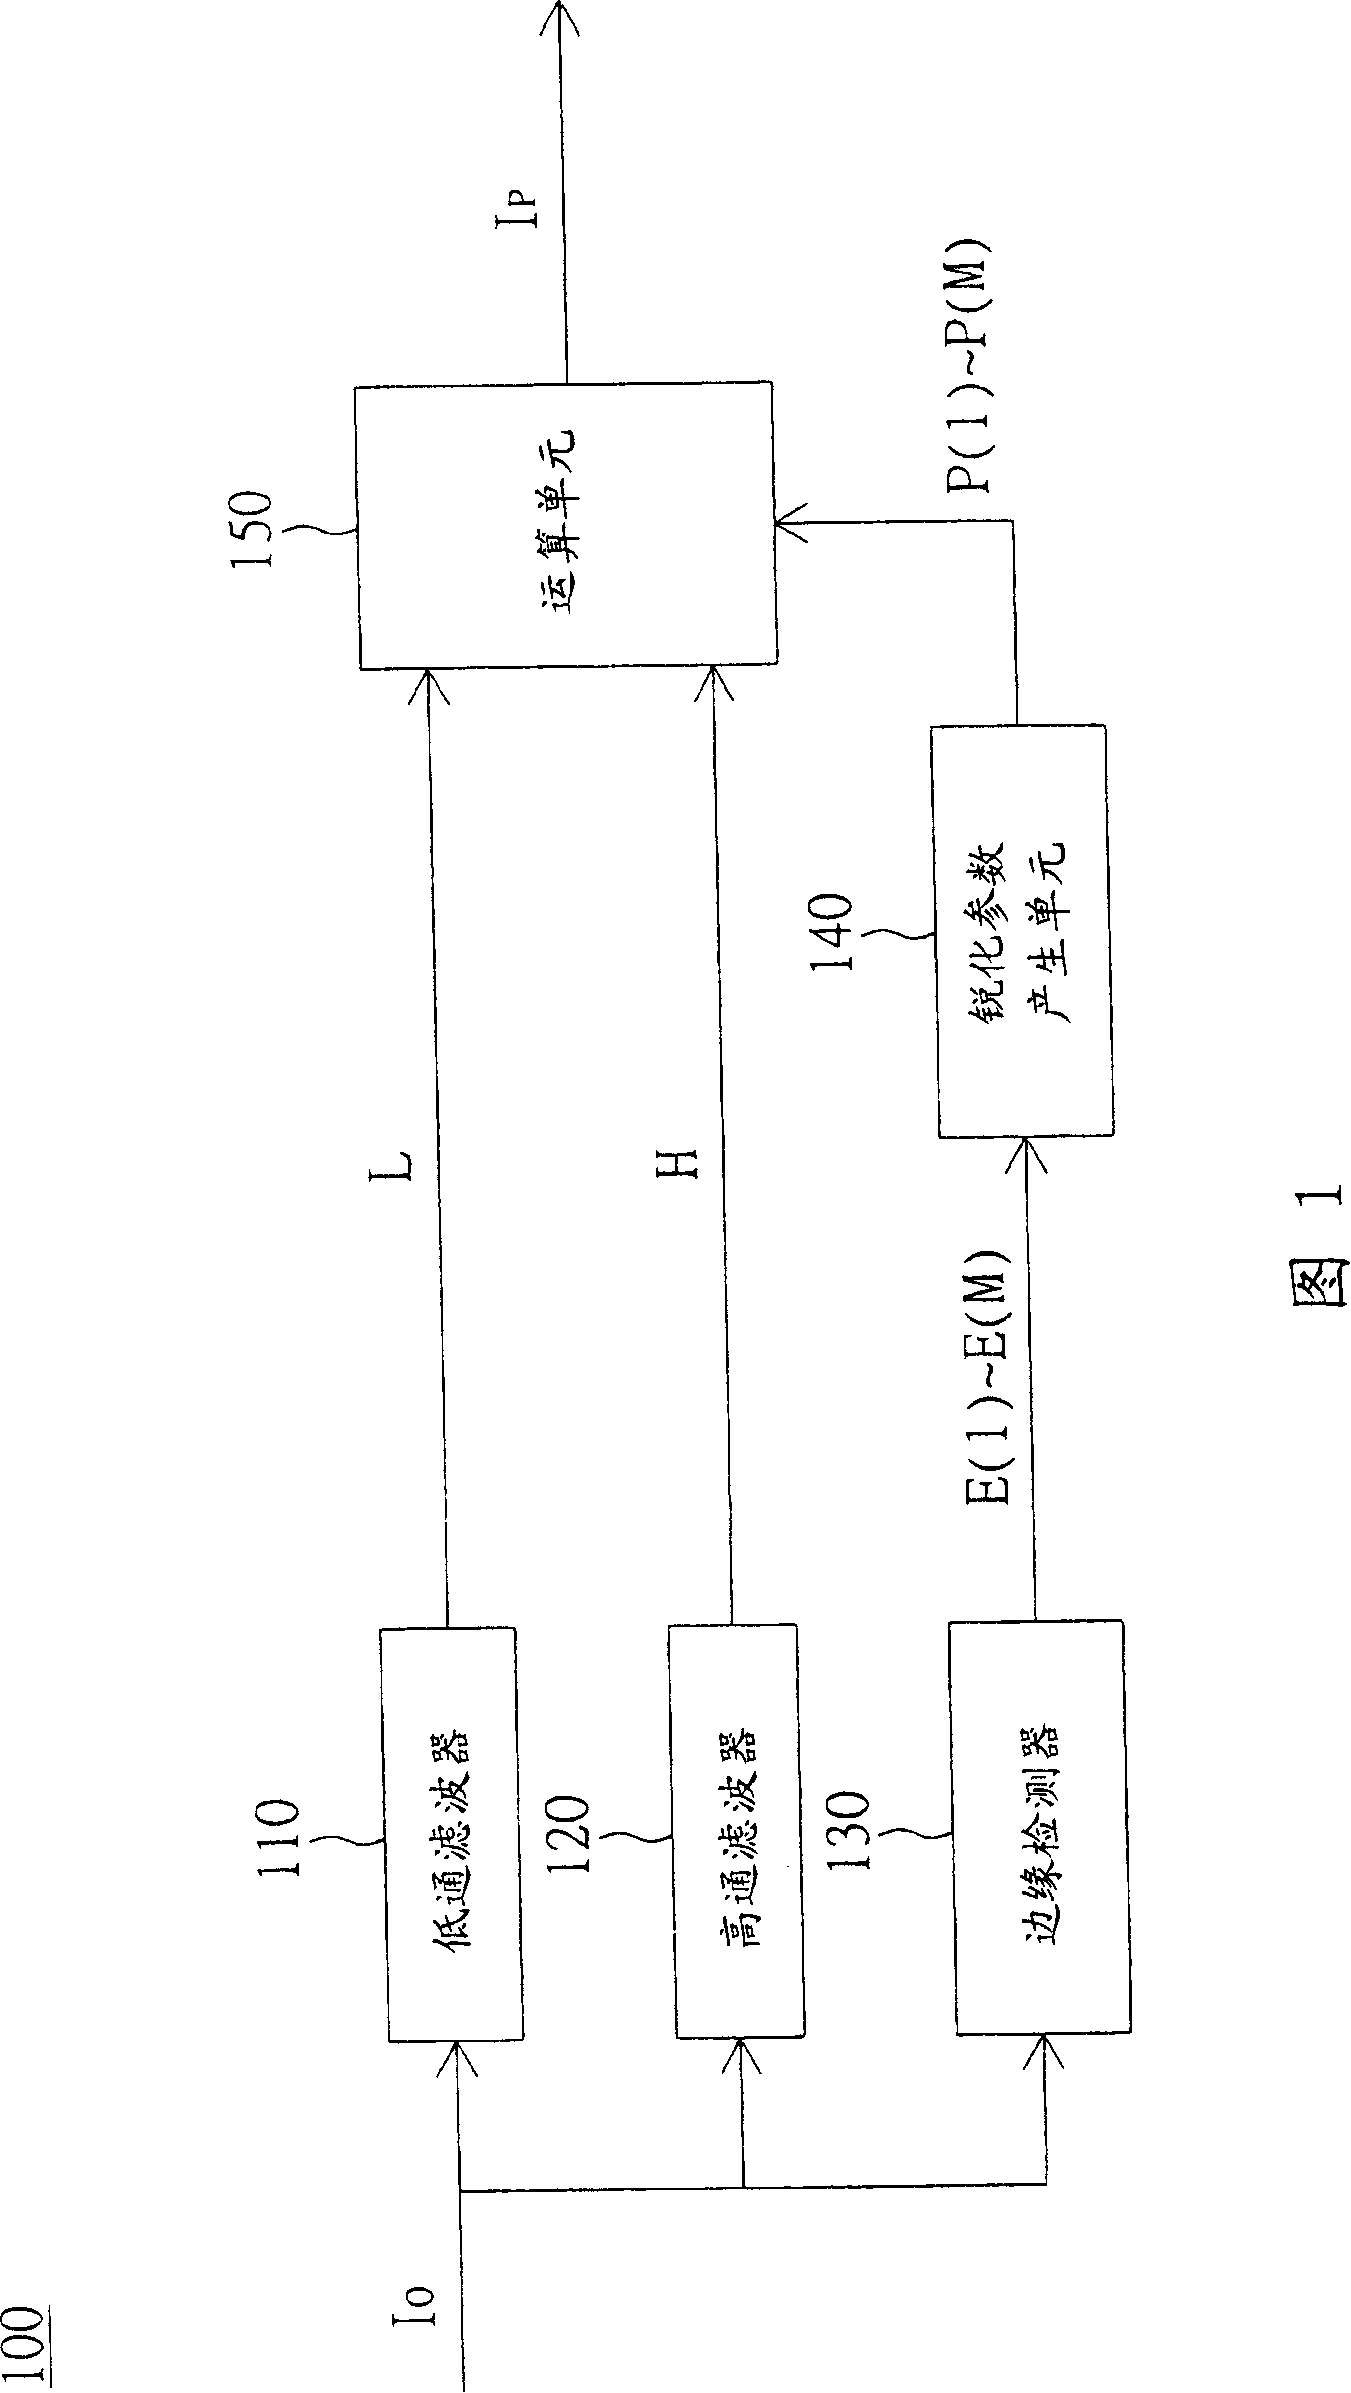 Image sharpening device and method